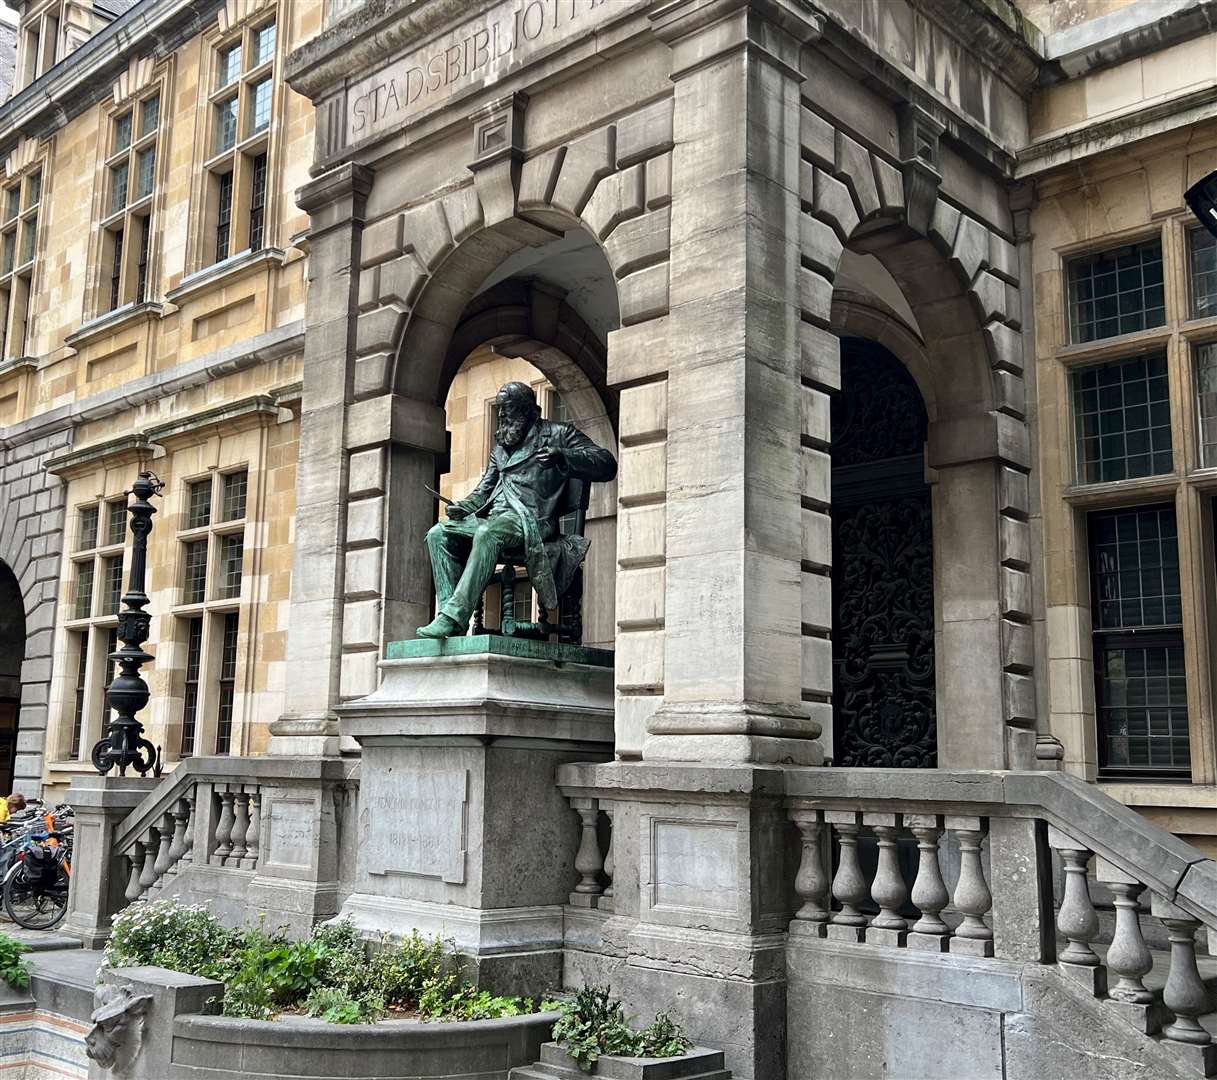 A statue of writer Hendrik Conscience dominates the main square